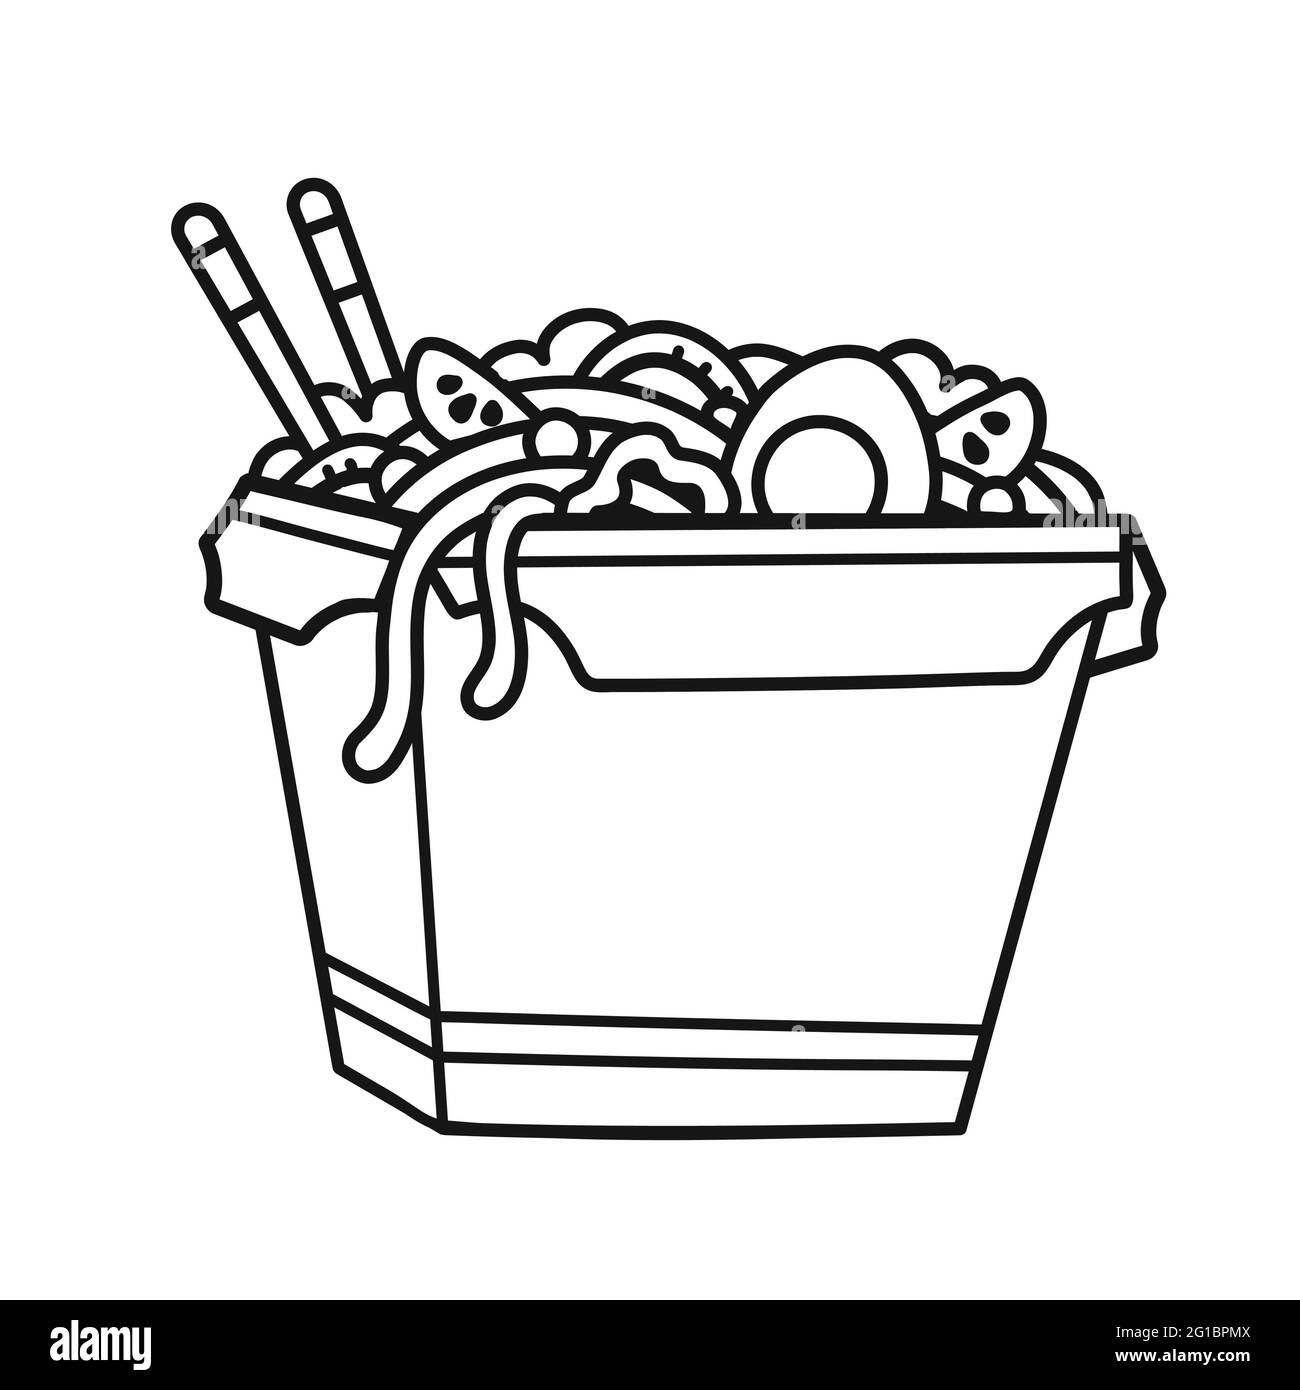 Wok noodle box. Vector hand drawn cartoon illustration icon. Isolated on white background. Wok noodle box, asian food, coloring book page concept Stock Vector